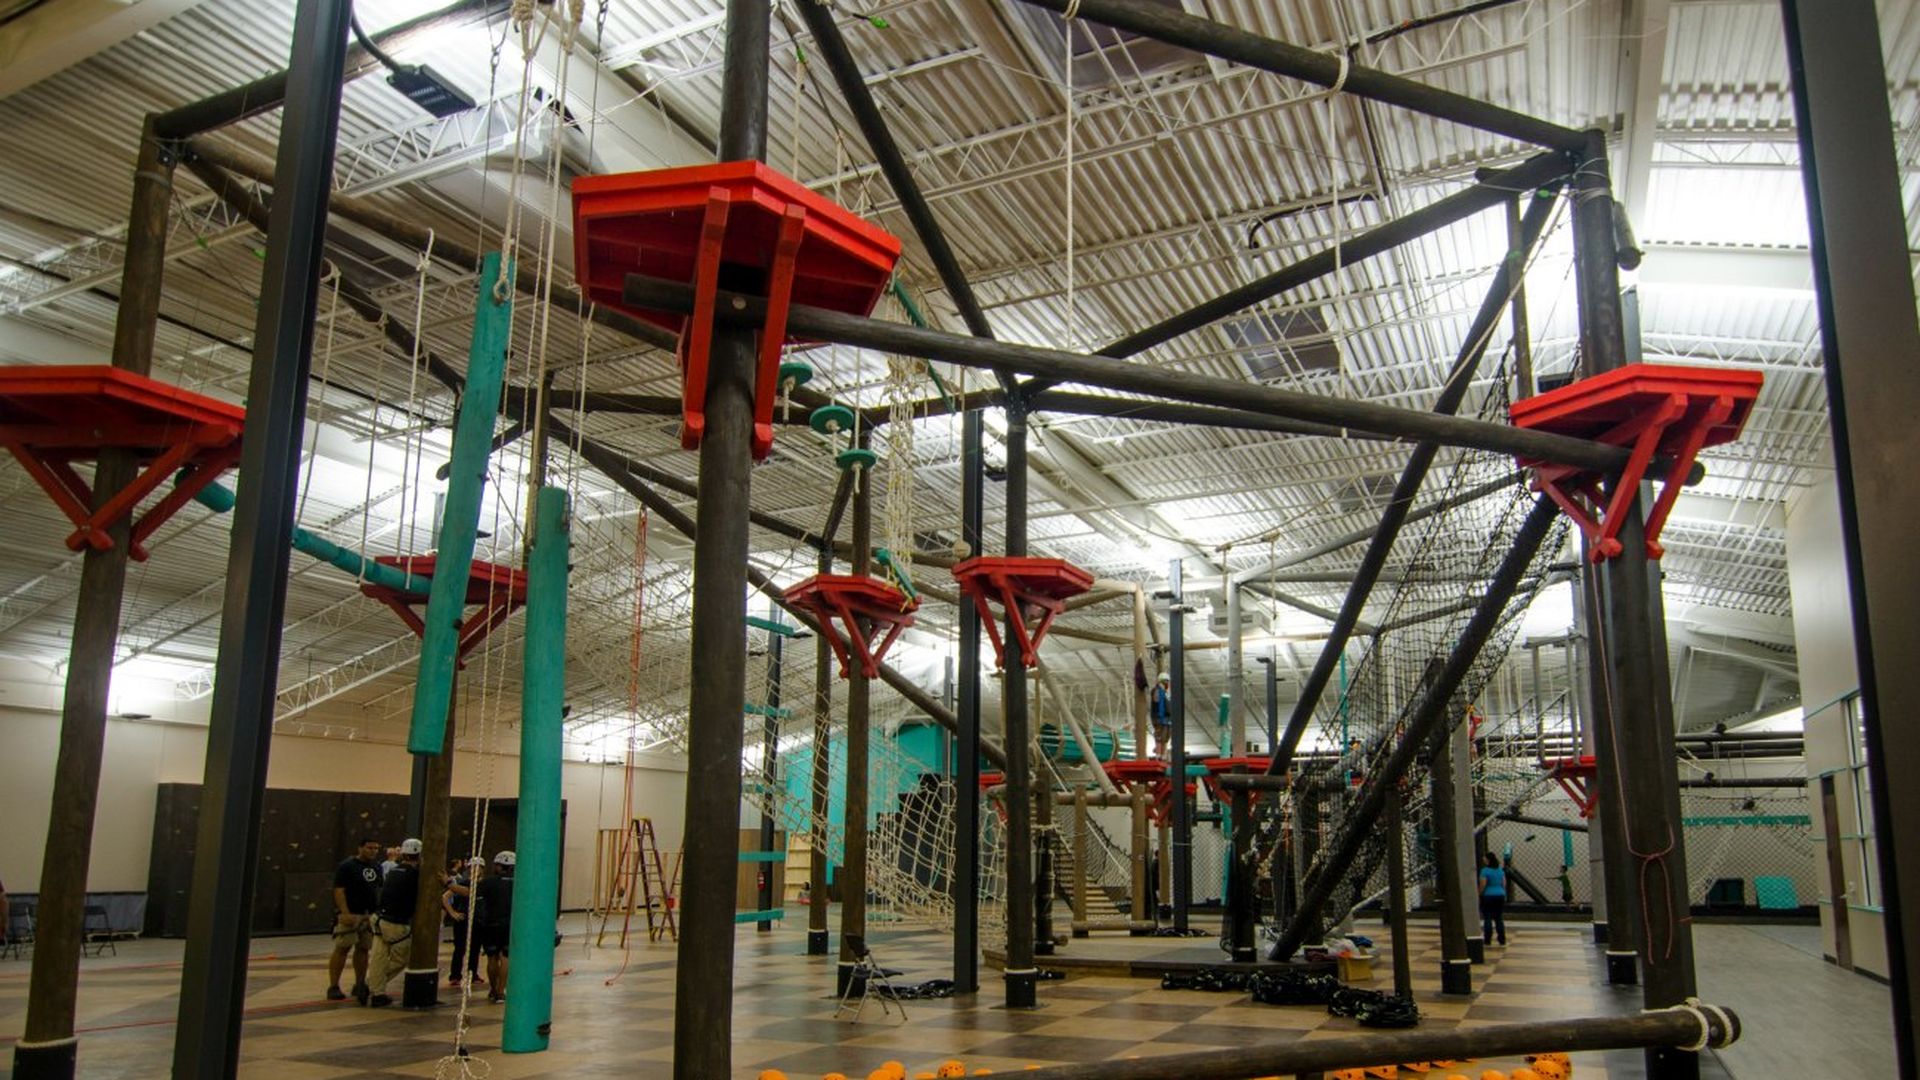 This 22,000-square-foot indoor obstacle course opens this weekend